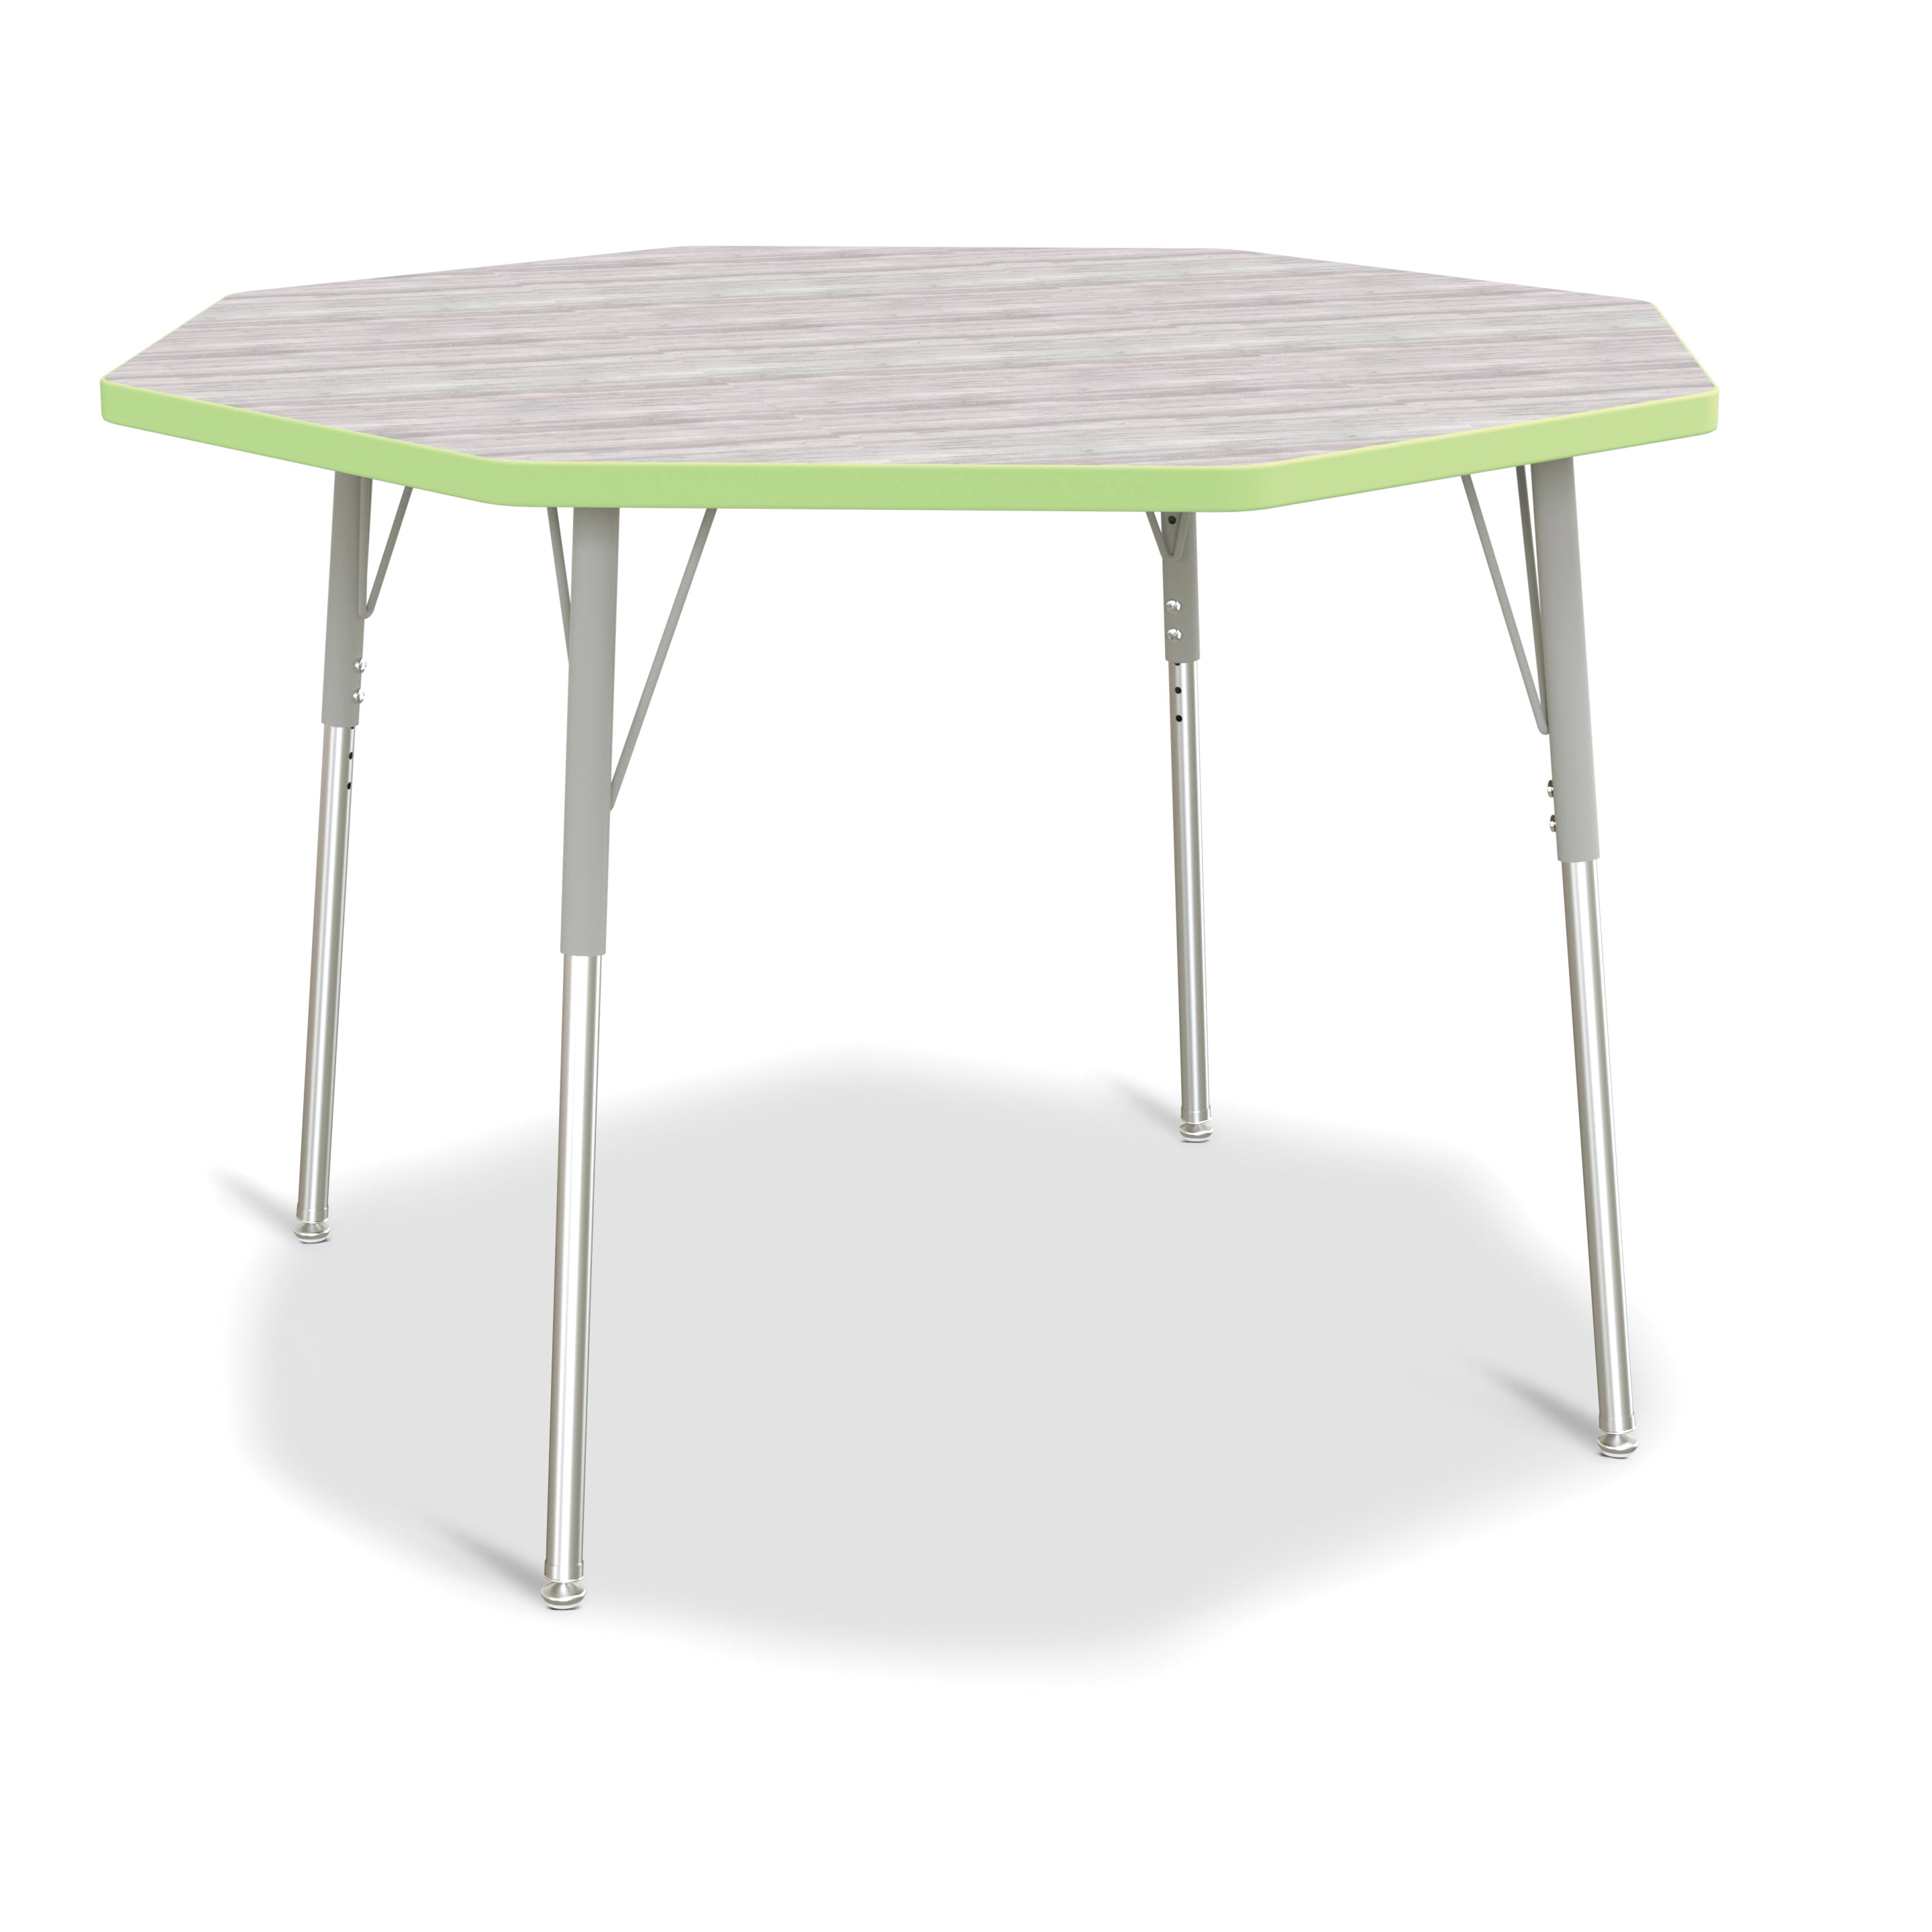 6428JCA451, Berries Octagon Activity Table - 48" X 48", A-height - Driftwood Gray/Key Lime/Gray